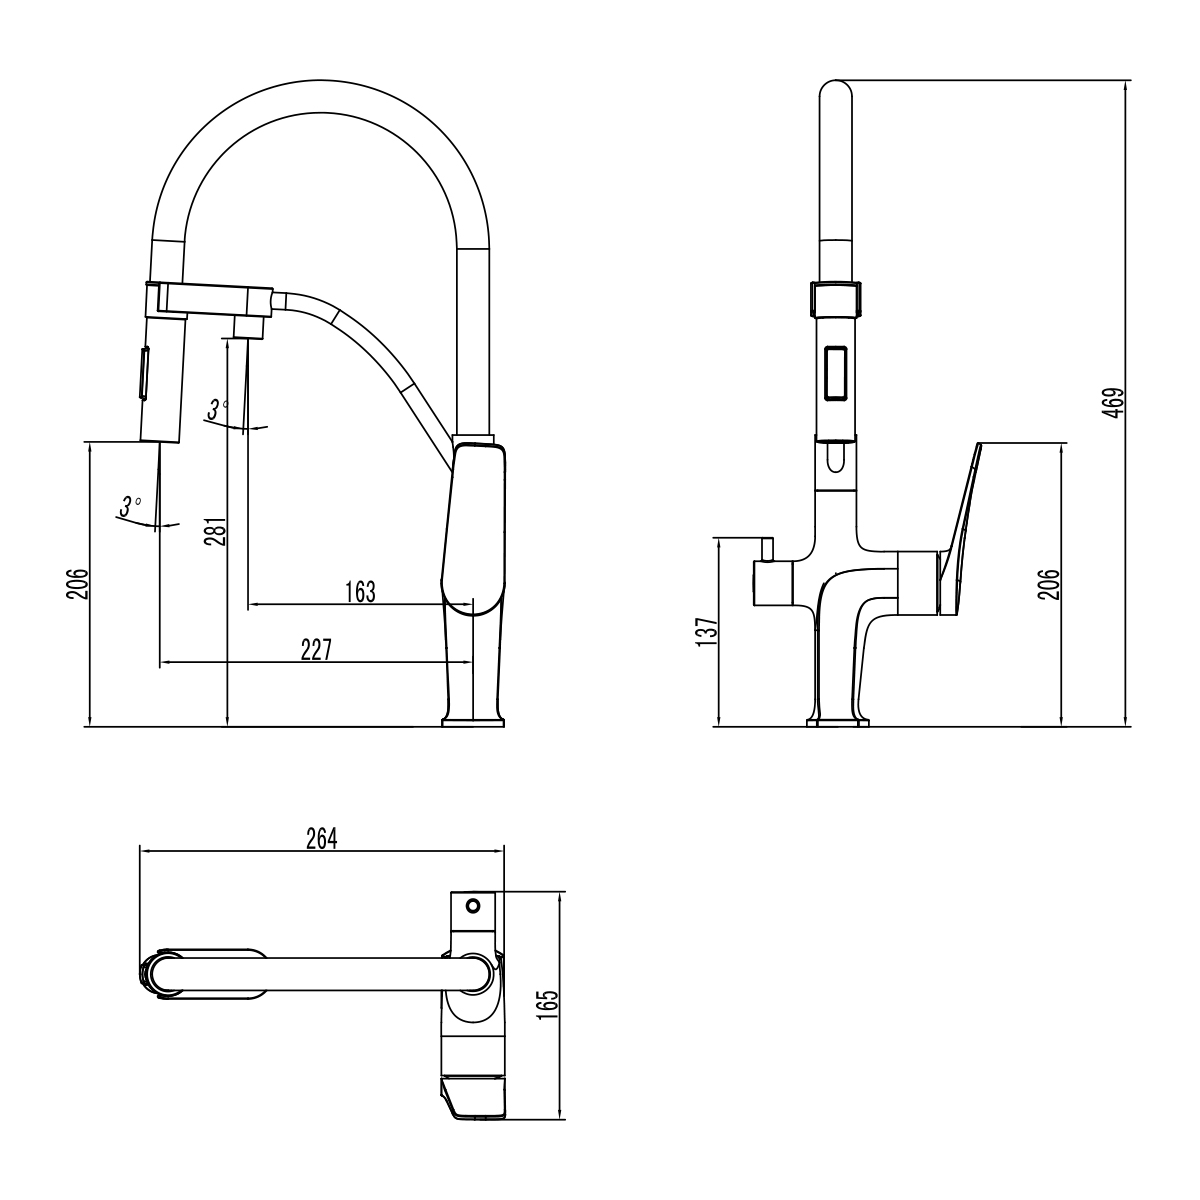 LM3761GM Kitchen faucet
with connection to drinking water supply